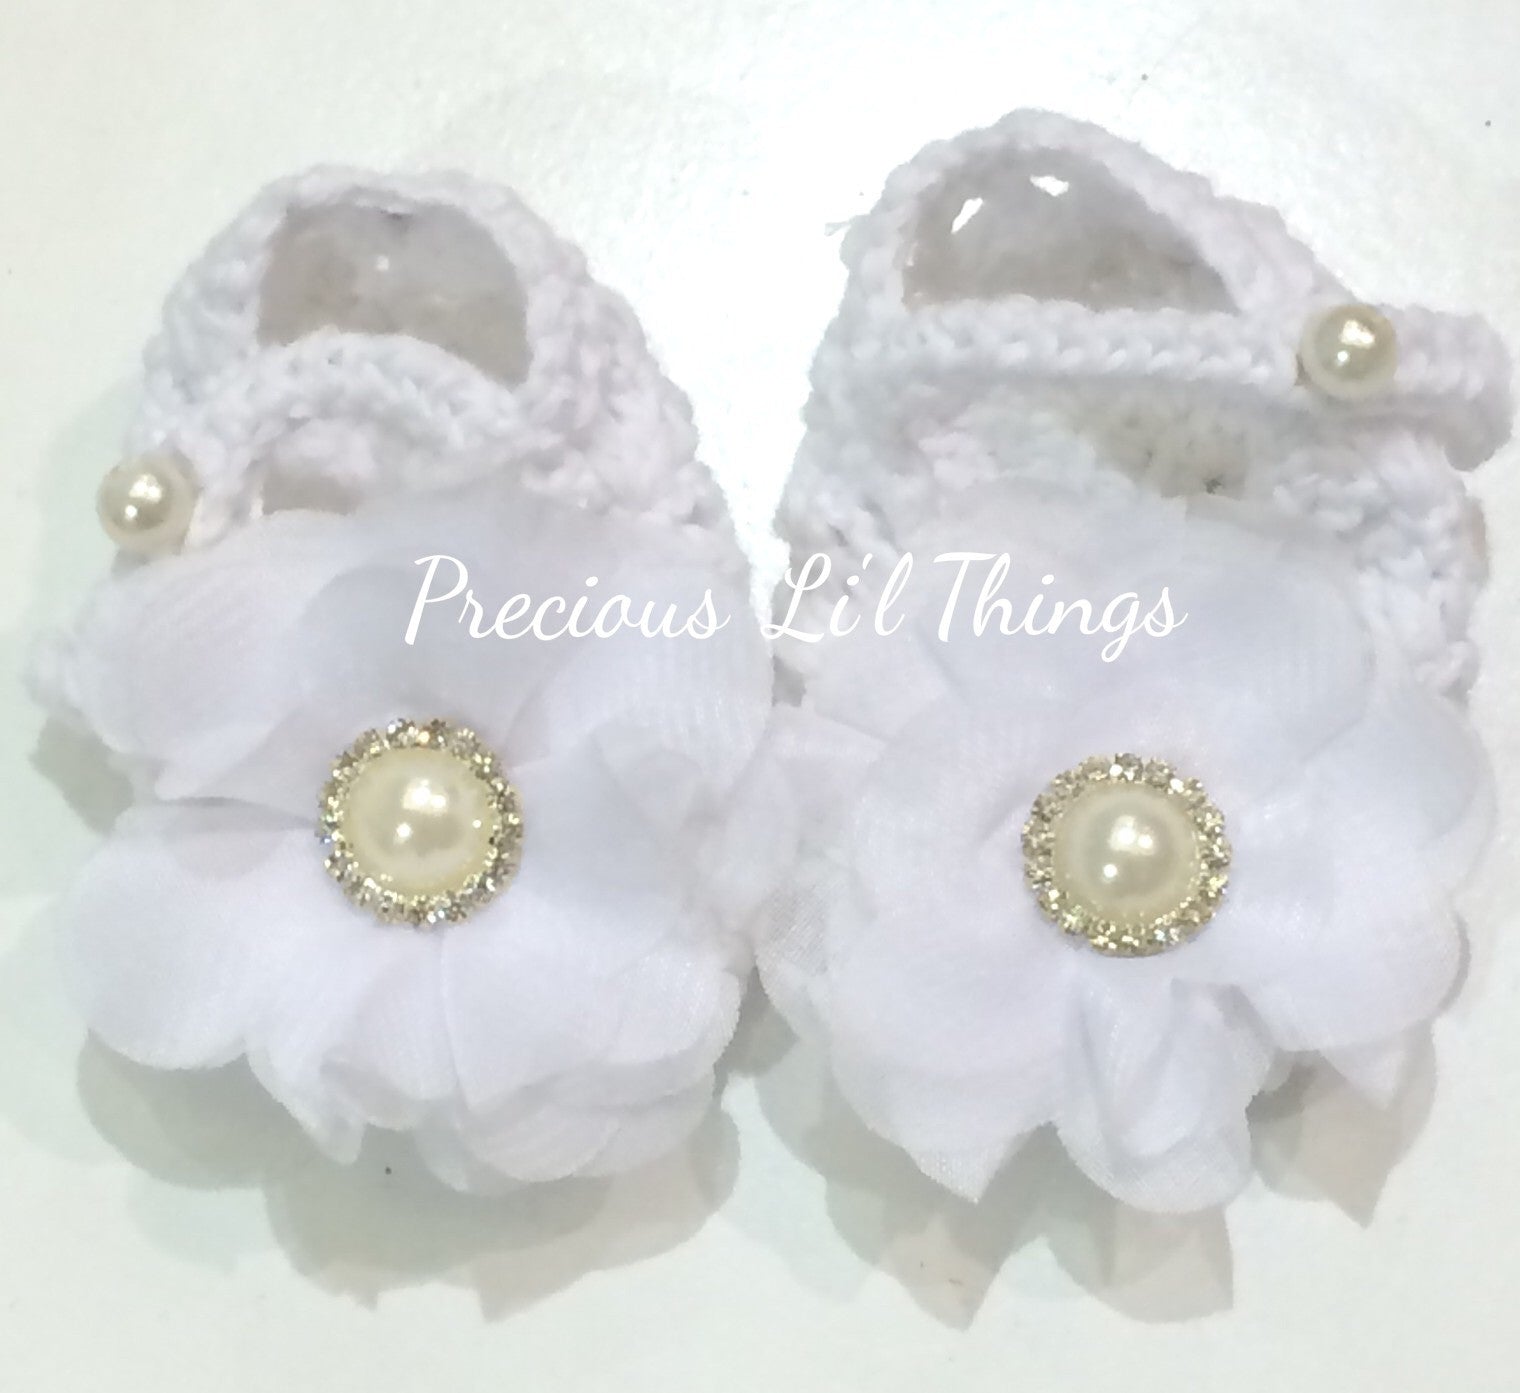 Newborn to one year white crochet flower booties. Shoes07